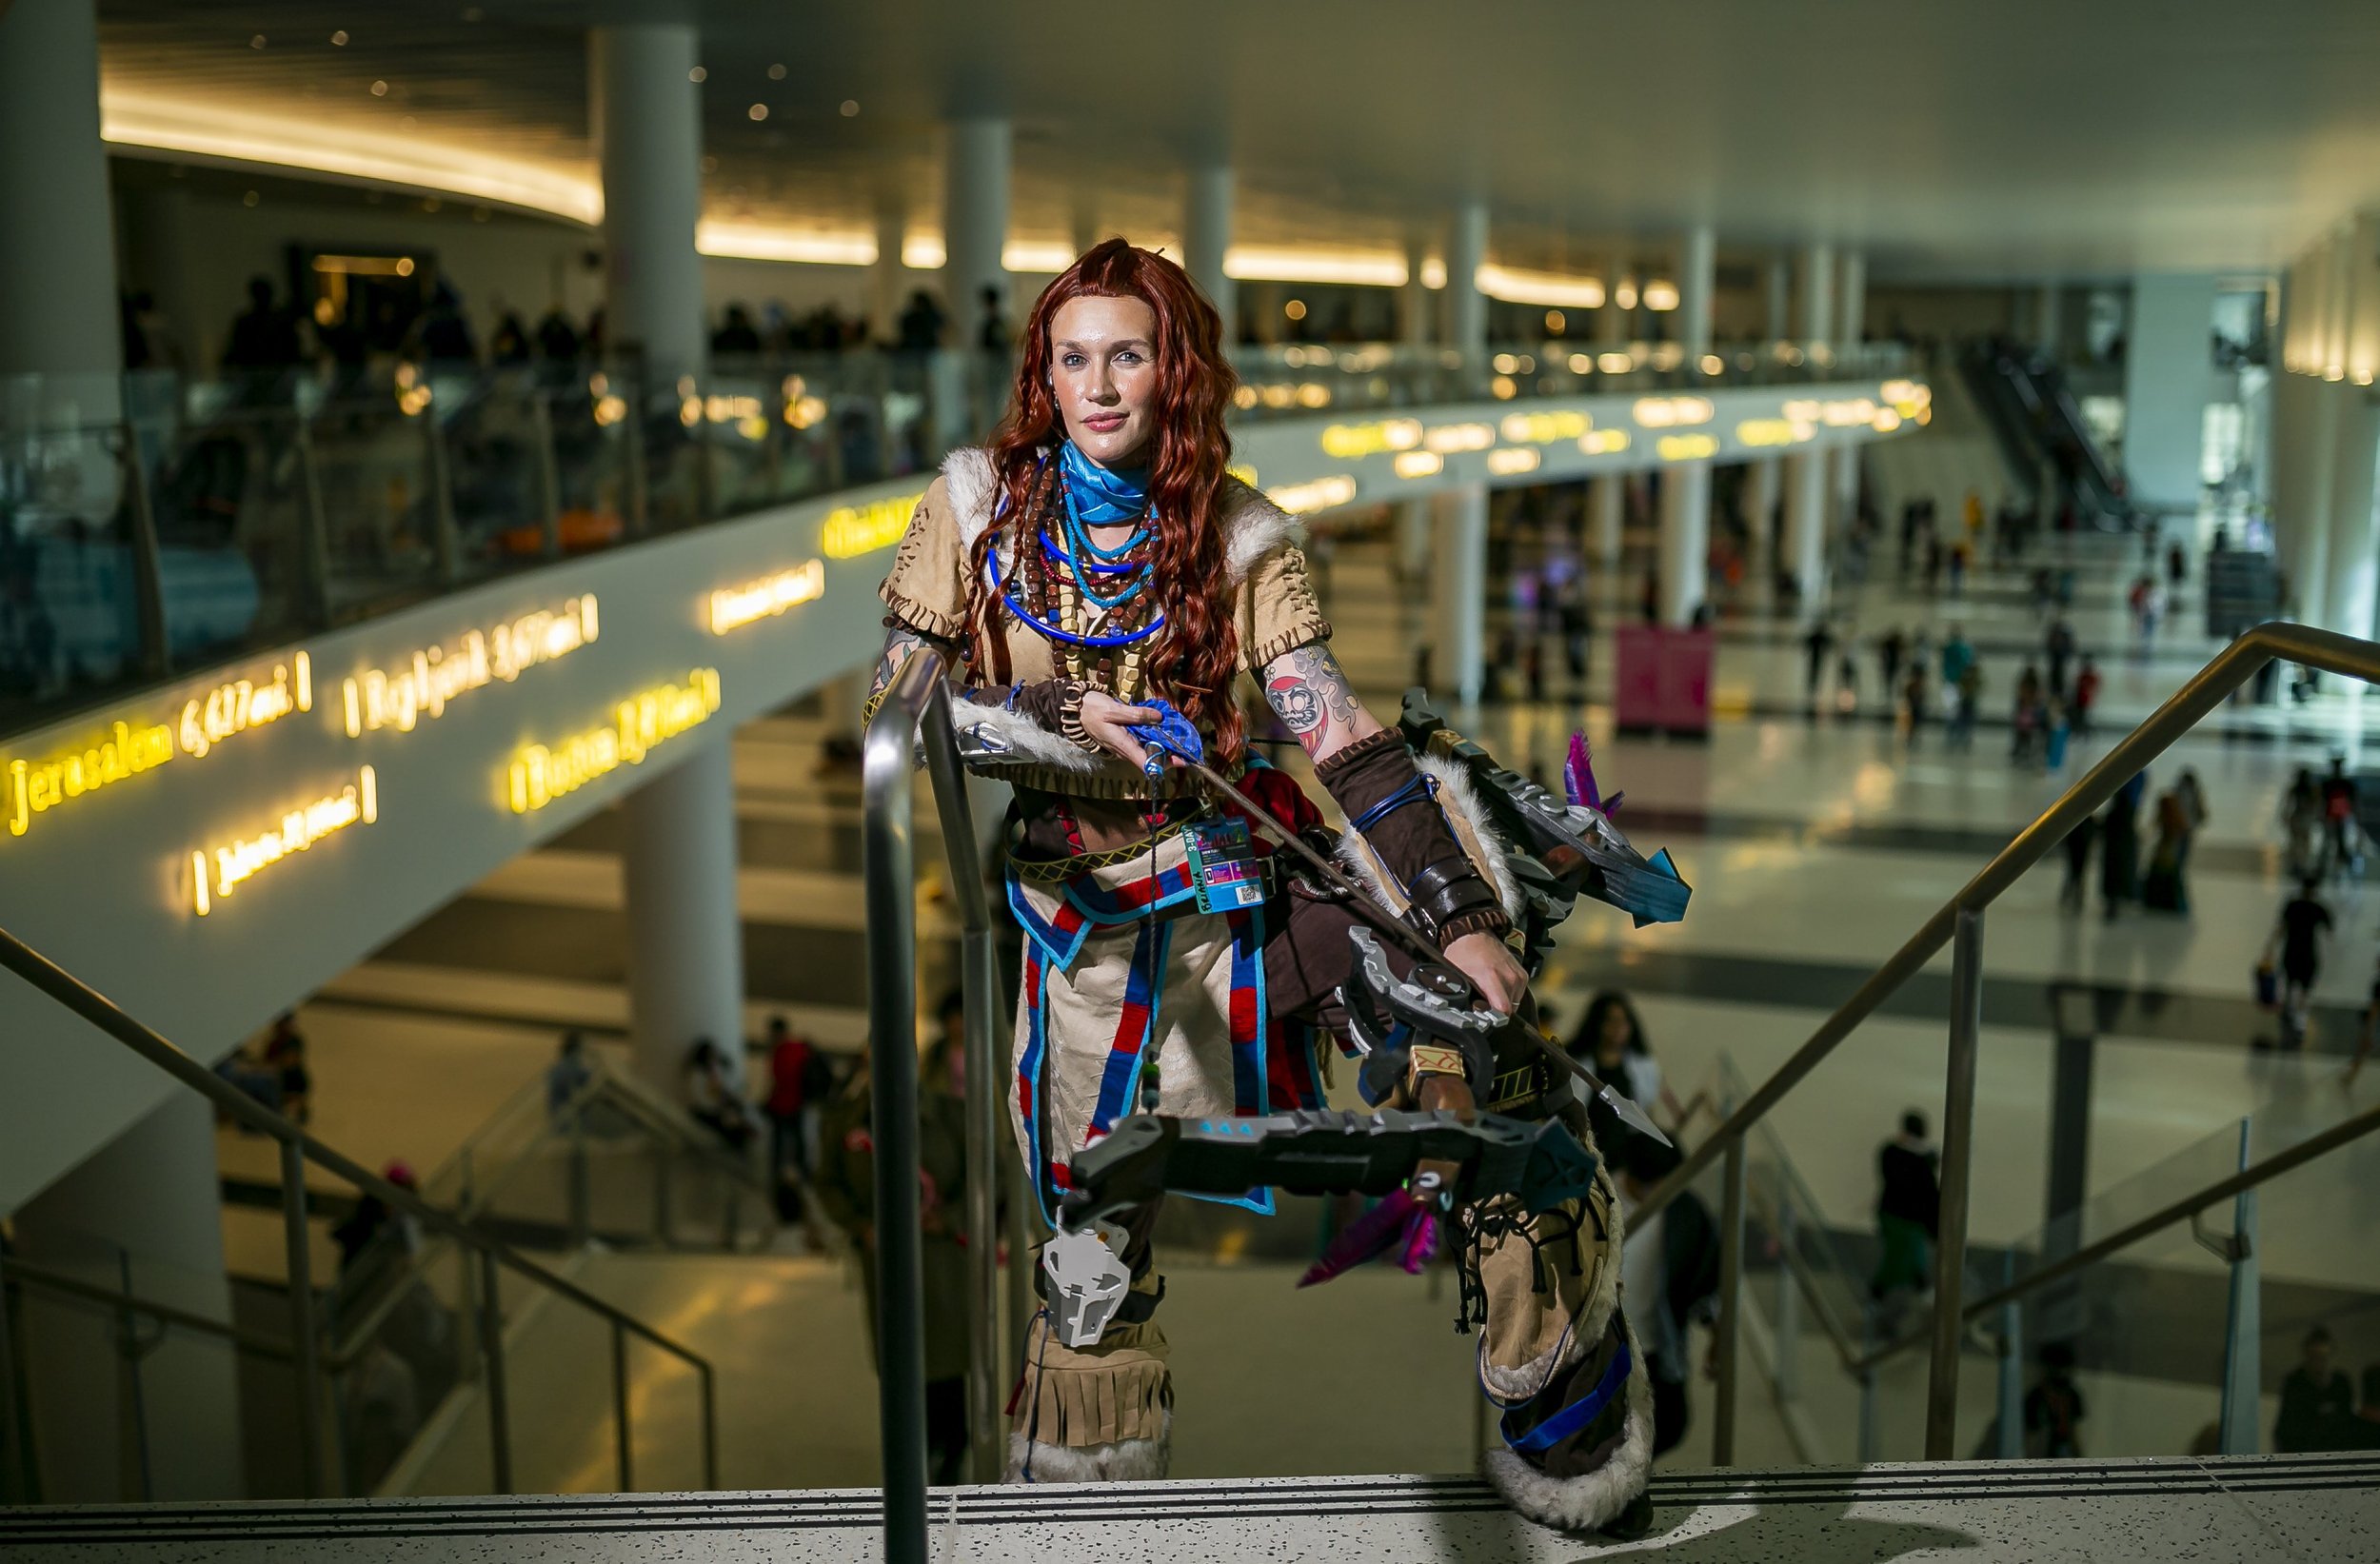  Briana Odowd cosplays as Aloy from the video game Horizon Zero Dawn during Florida Supercon at the Miami Beach Convention Center on Saturday, July 9, 2022 in Miami Beach, Fla. 